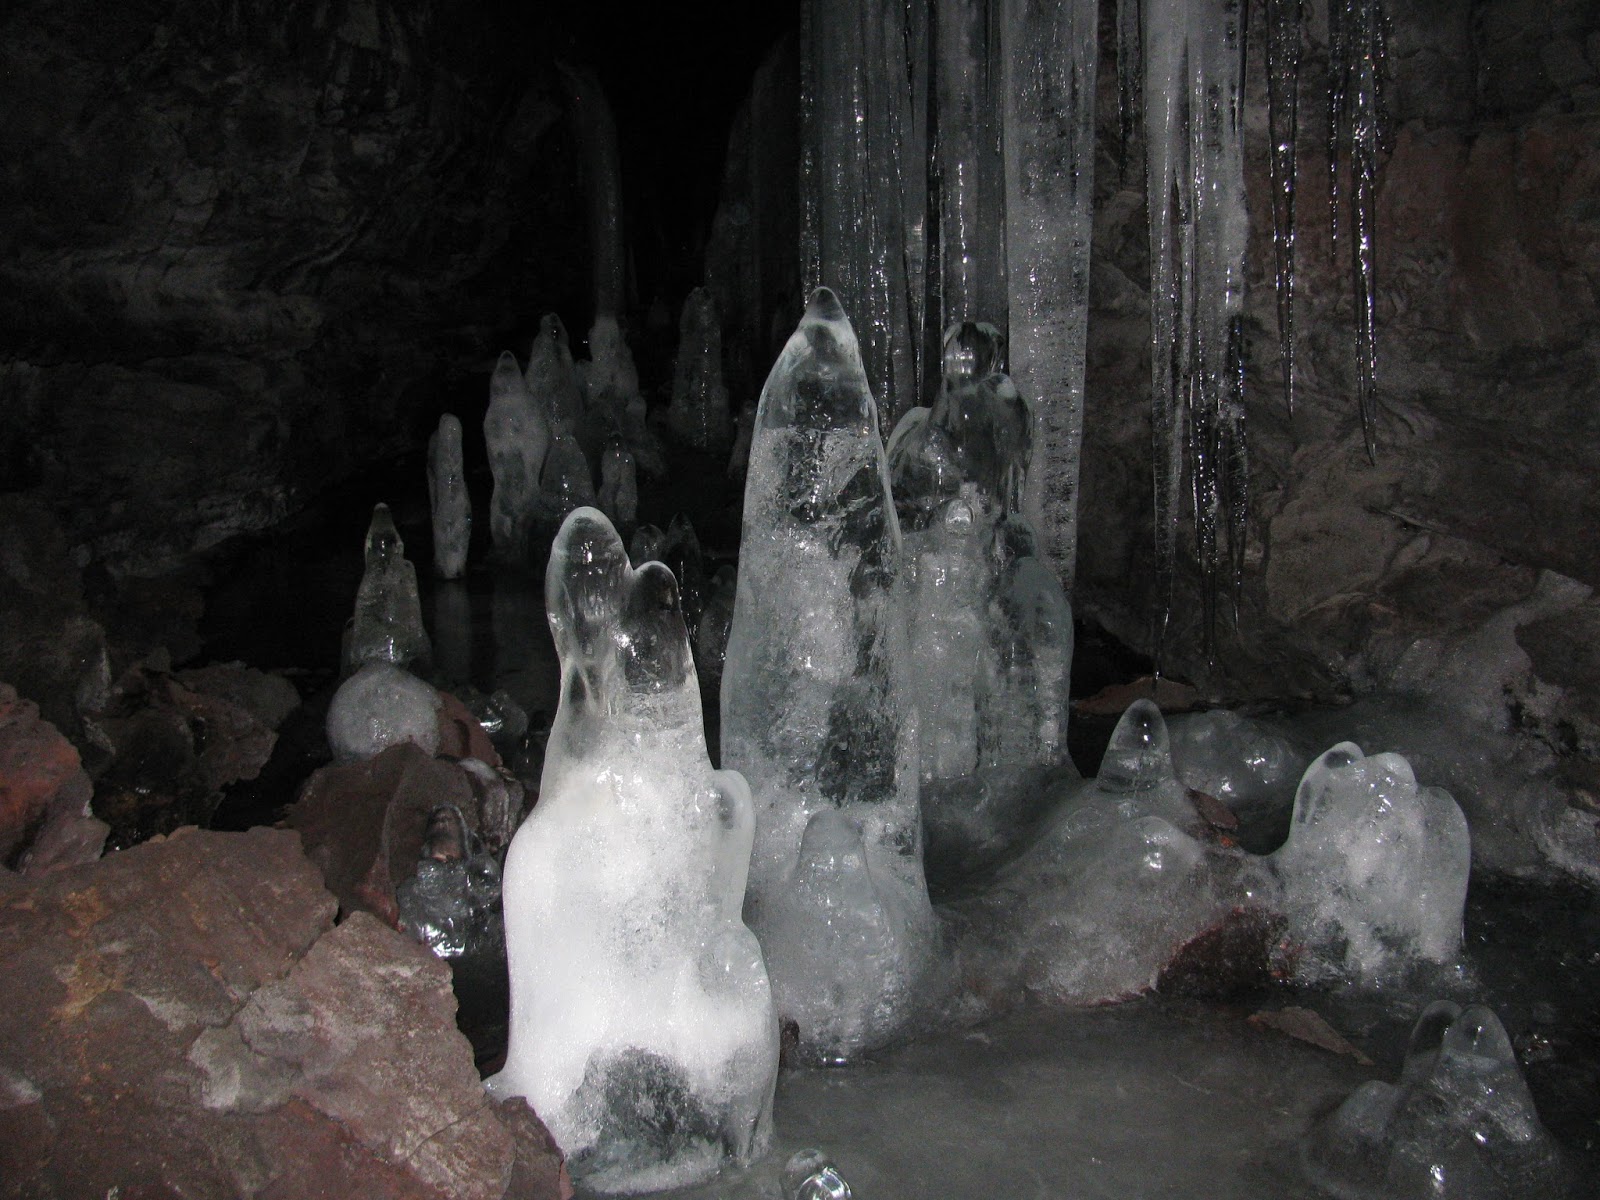 Weekend Wanderluster Crystal Ice Cave Lava Beds National Monument